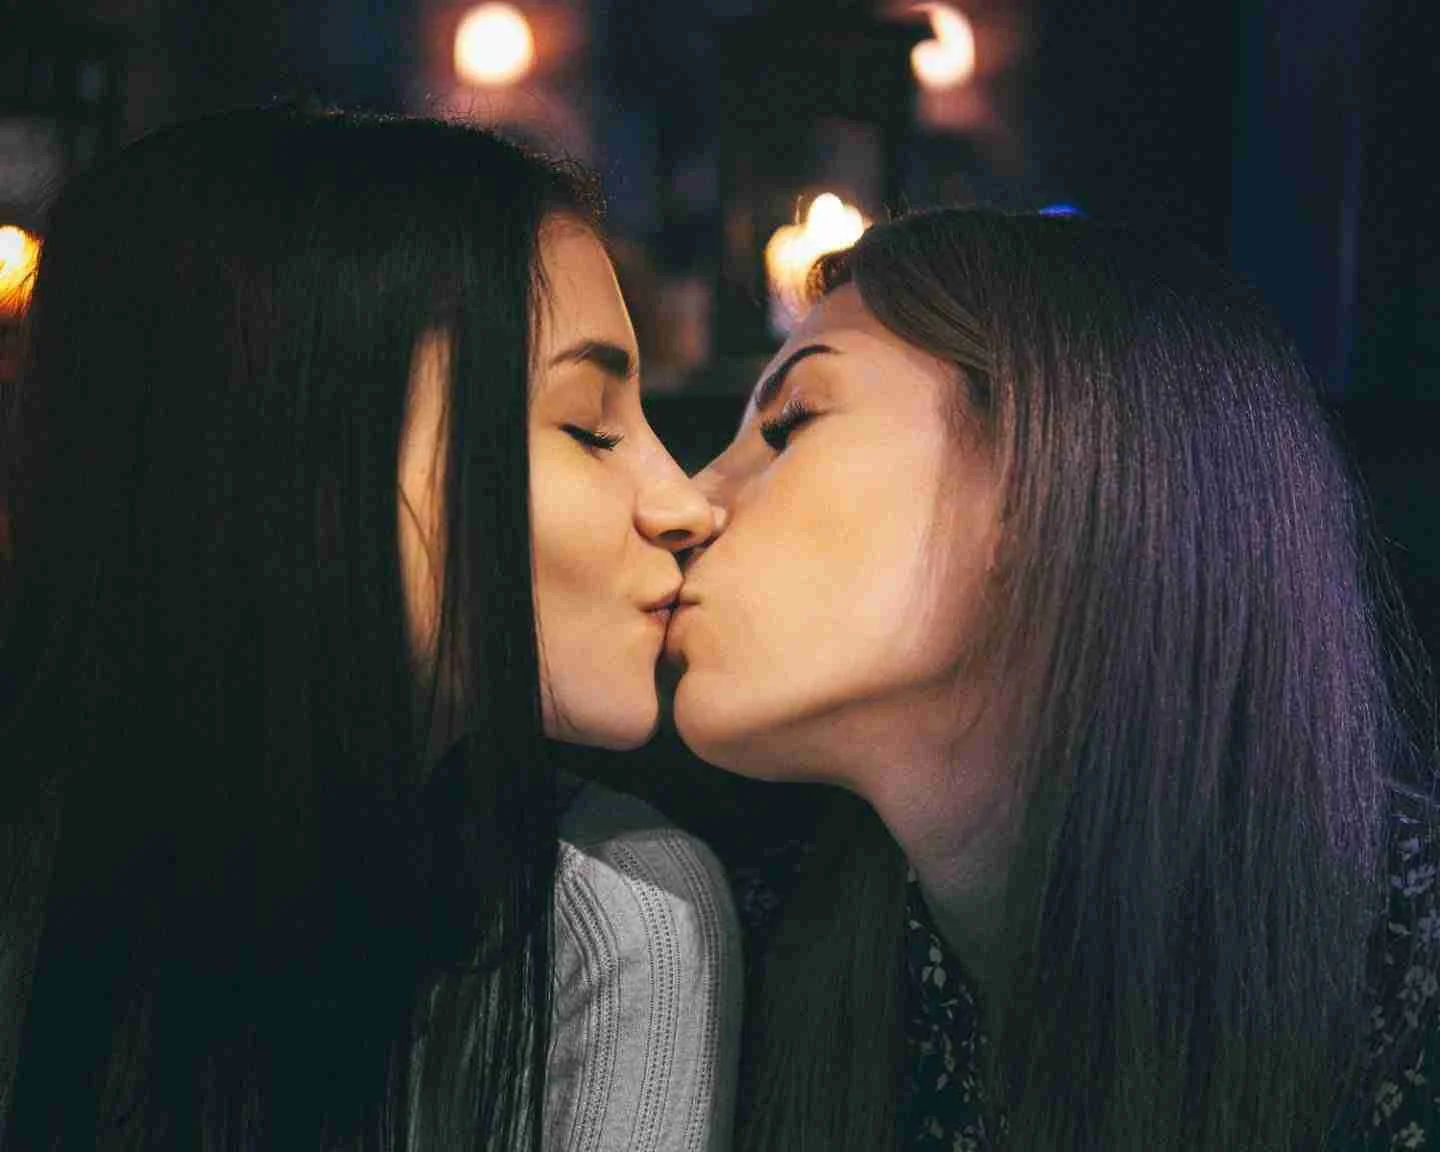 lesbian bars and nightlife in london